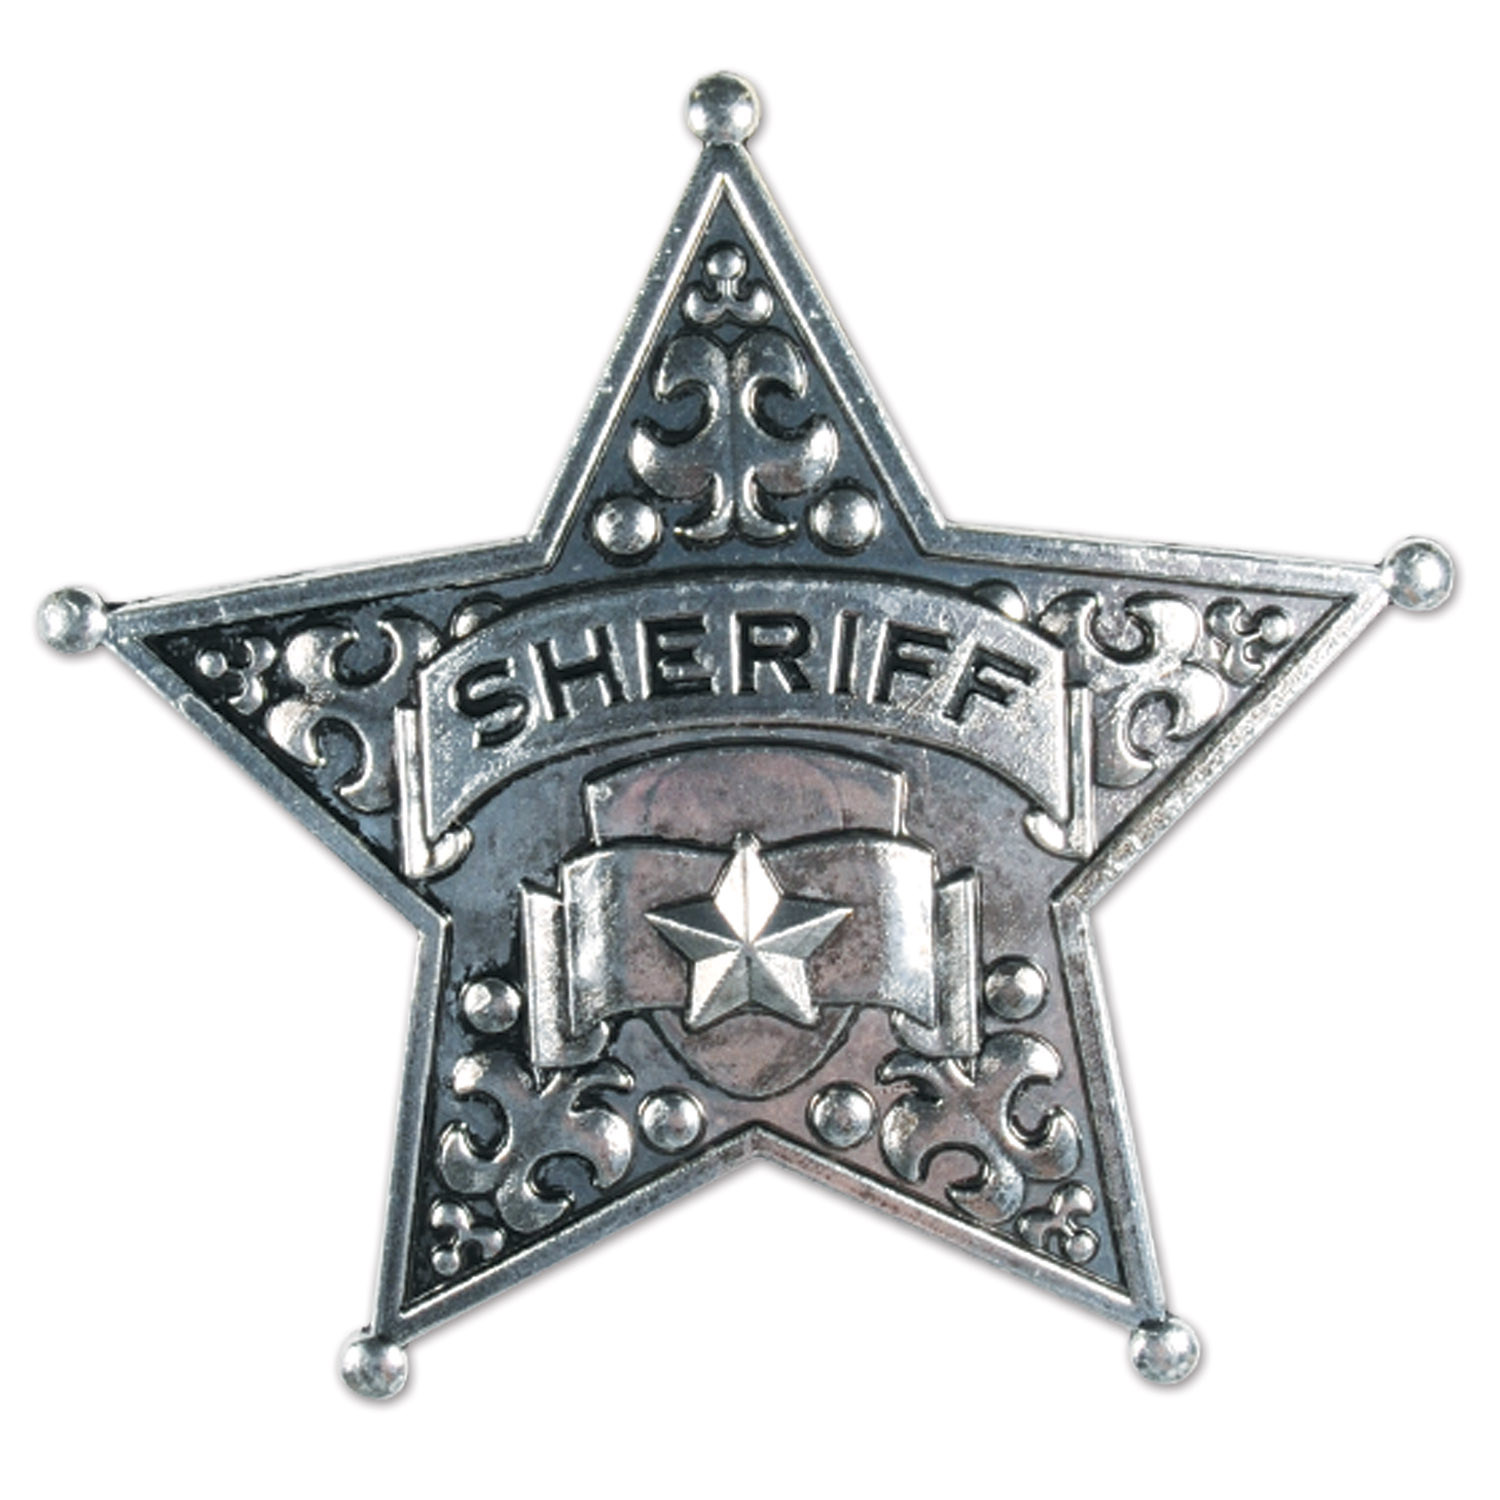 Details about   25 NEW METAL TOY SHERIFF BADGES  WEST COWBOY SILVER SHERIFF'S BADGE PARTY FAVORS 